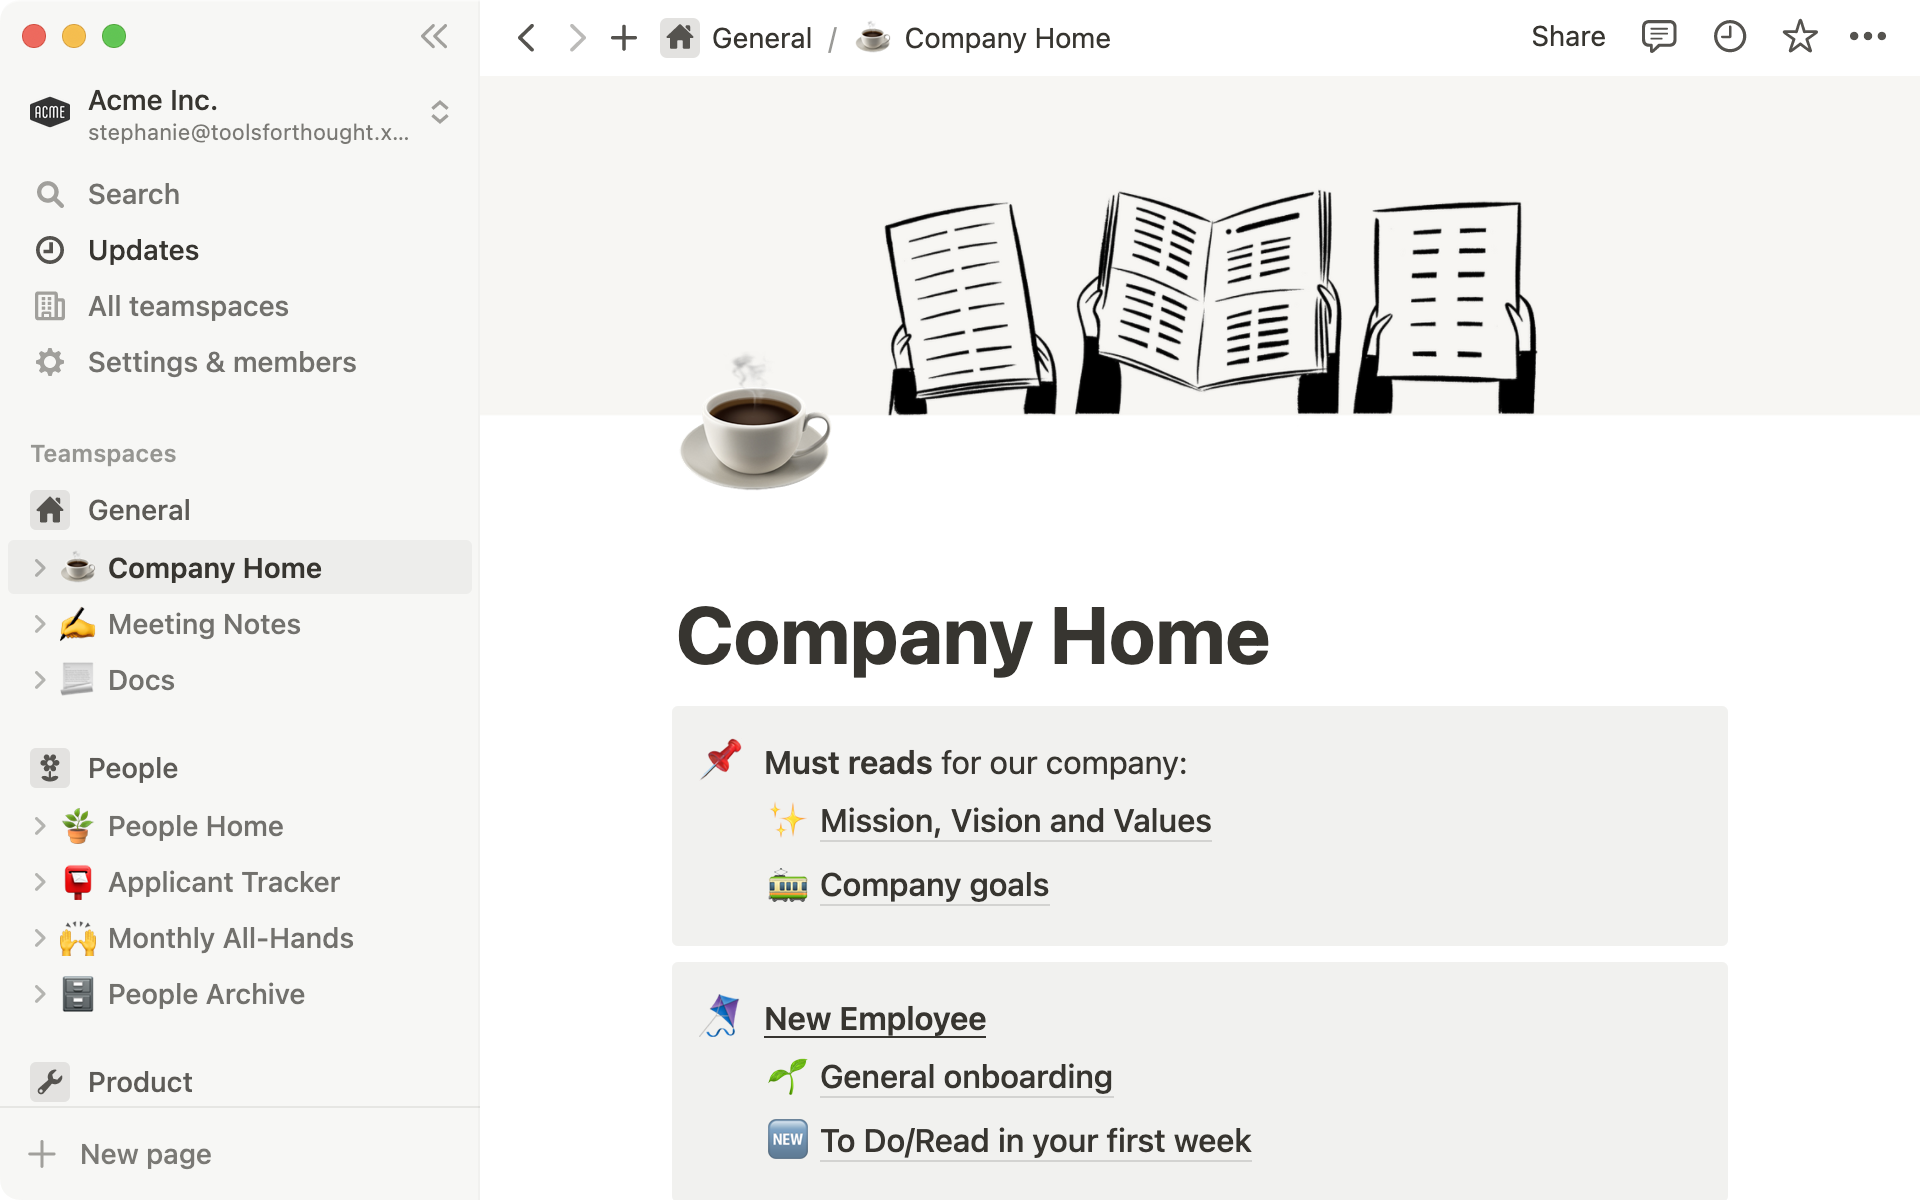 Teamspaces can help organize information within and across departments at your organization.